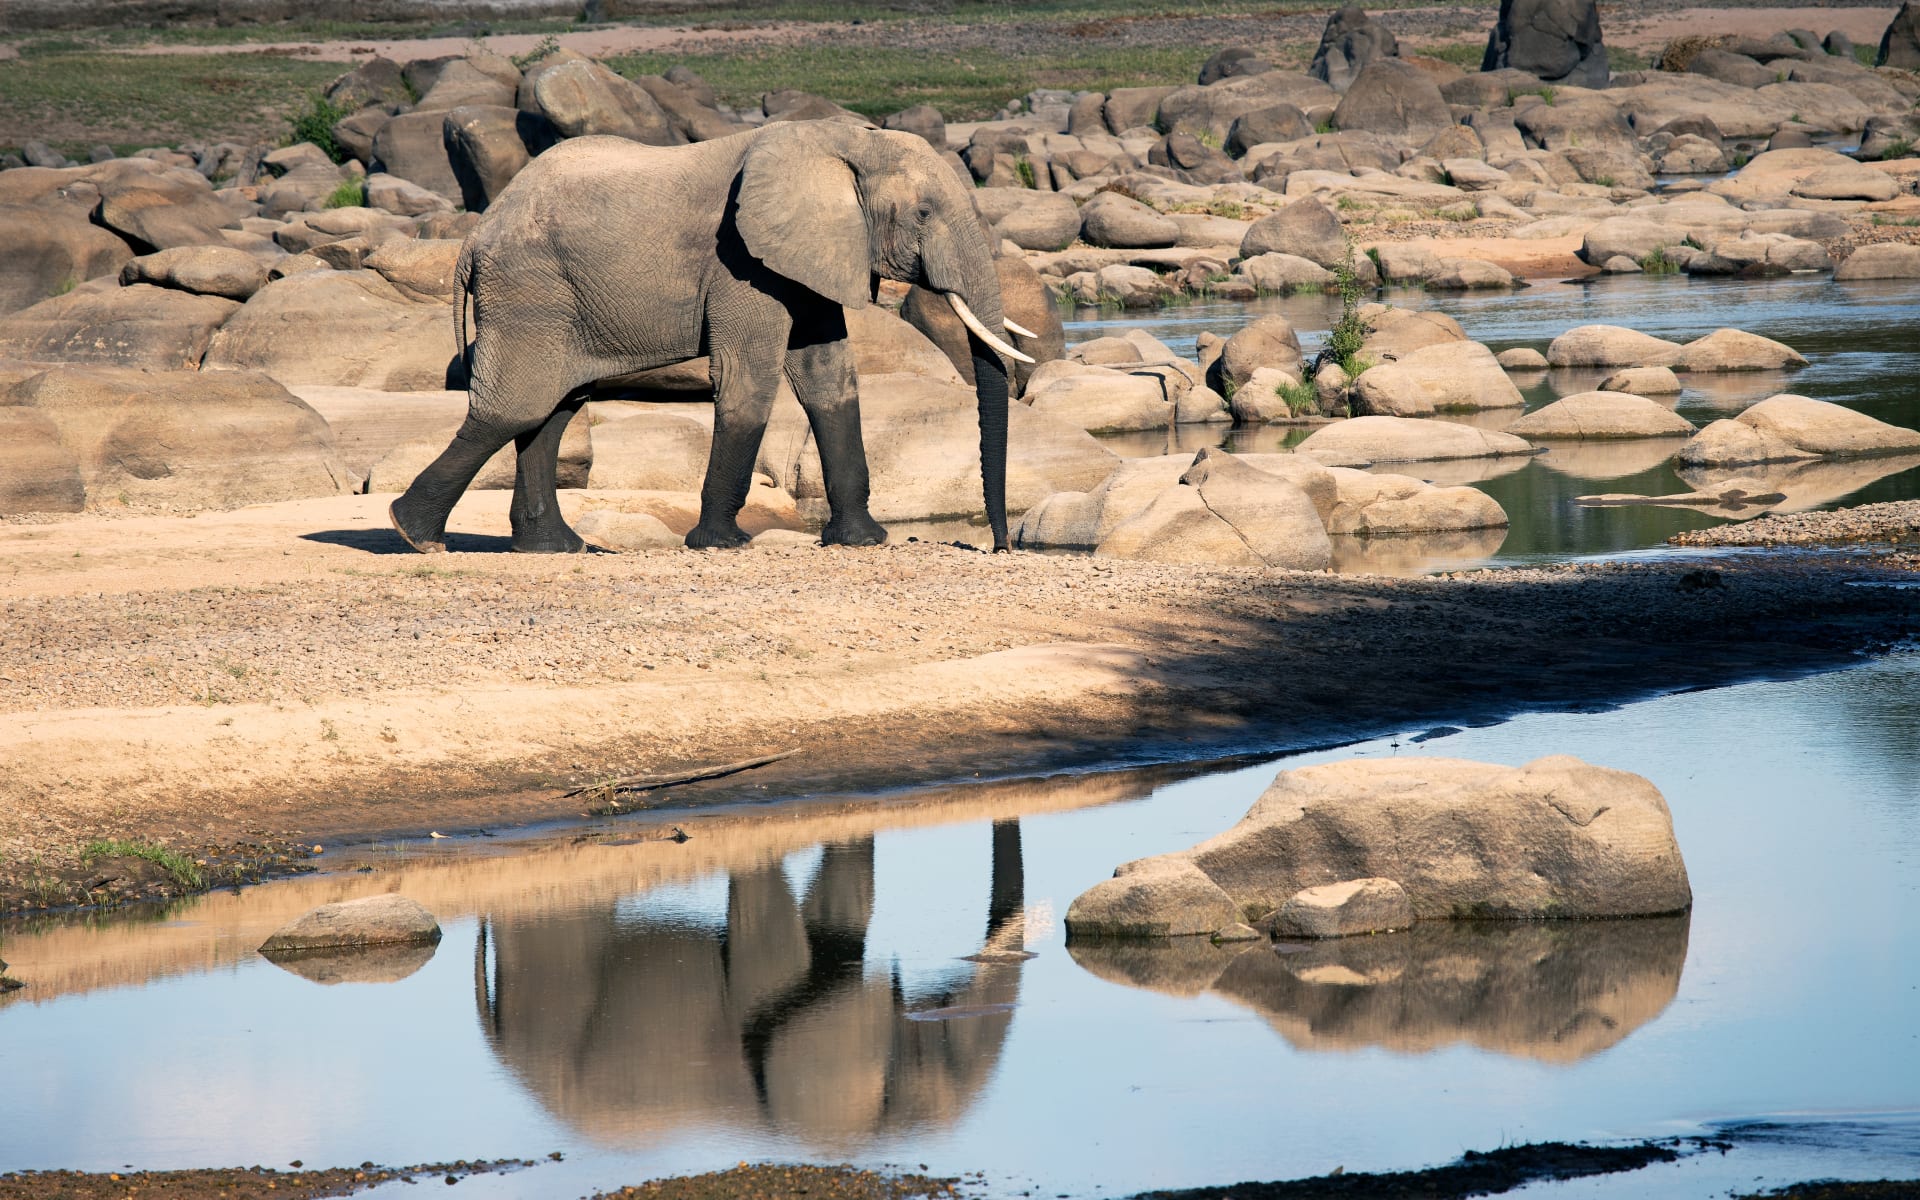 A young elephant wanders the river banks in Ruaha National Park. You can see its reflection in the river.